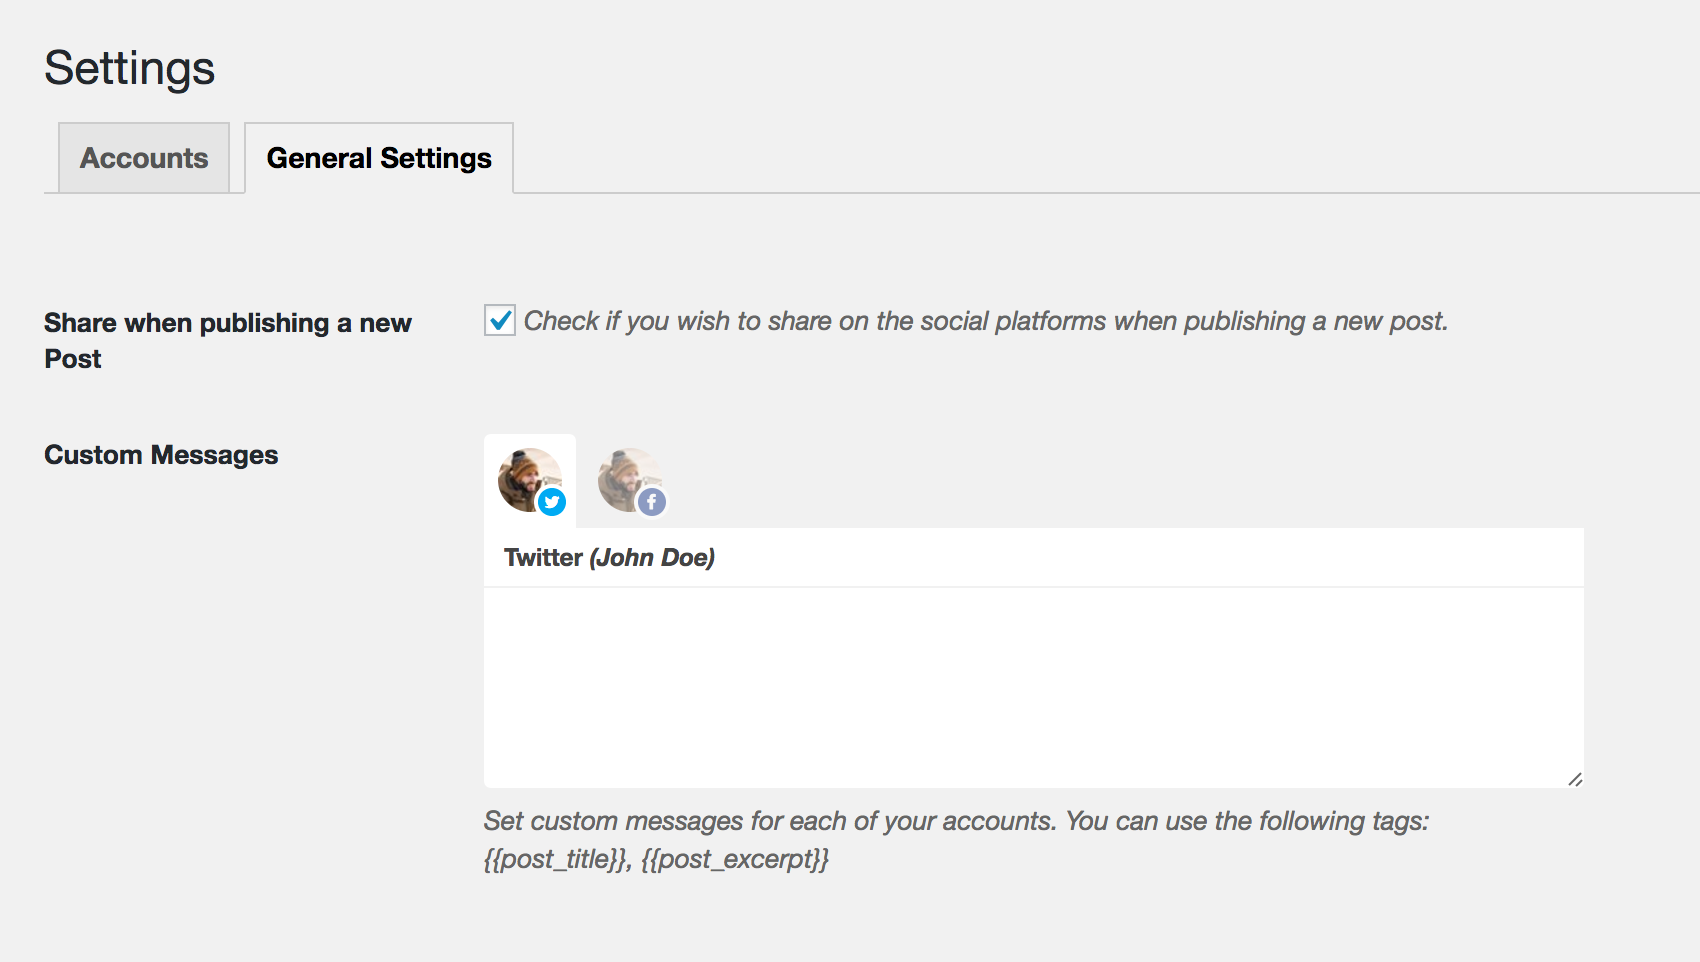 The Settings page where you can add a custom default message to be shared for each social account